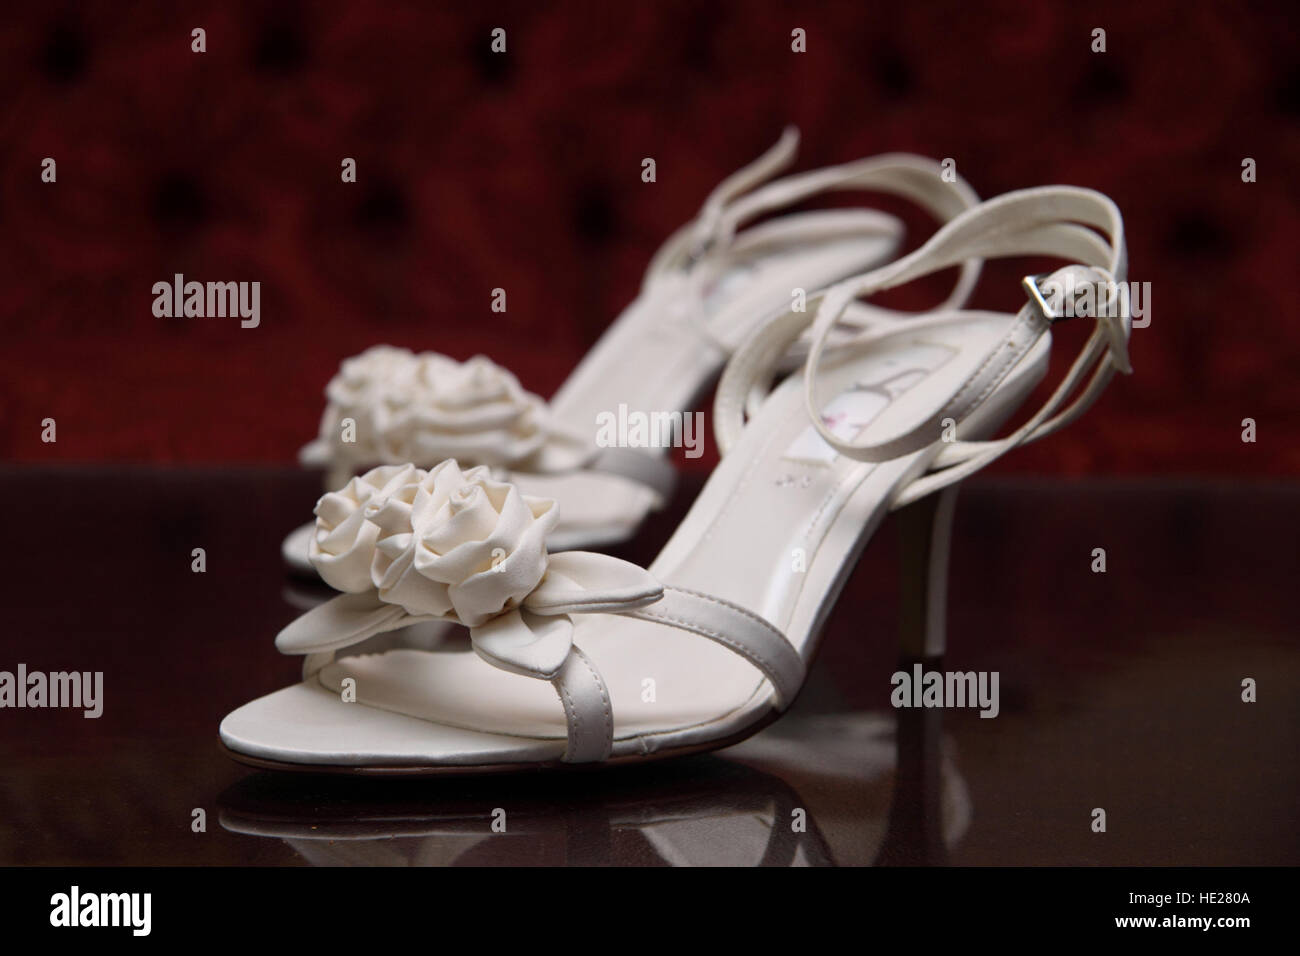 Bride's wedding shoes, high heels, white, with fabric roses on the toe straps Stock Photo